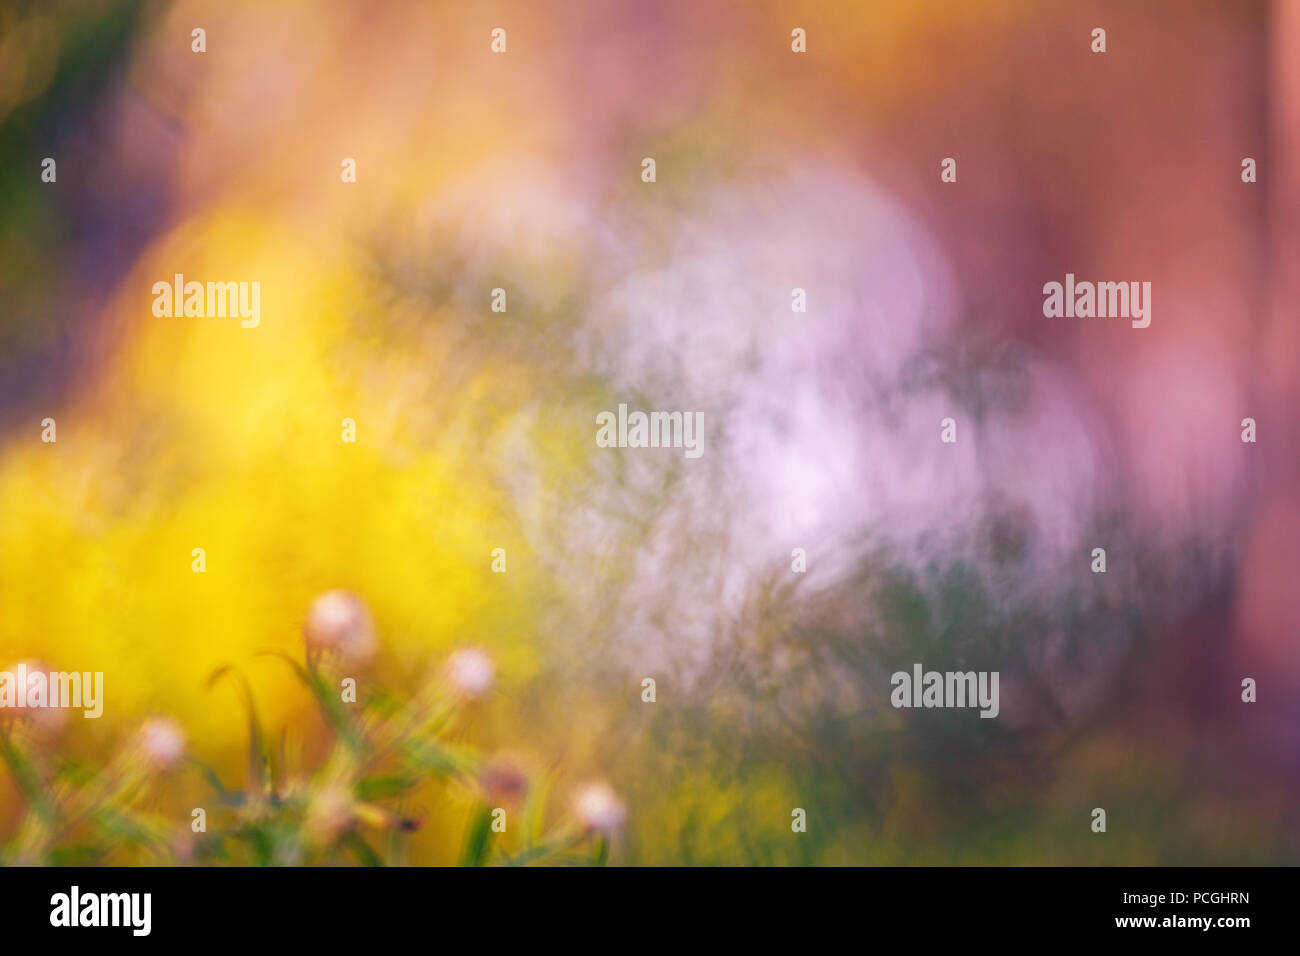 Beautiful colorful fairy dreamy magic yellow red flower blurry background, toned with instagram filters,  macro closeup nature image shot wallpaper ca Stock Photo